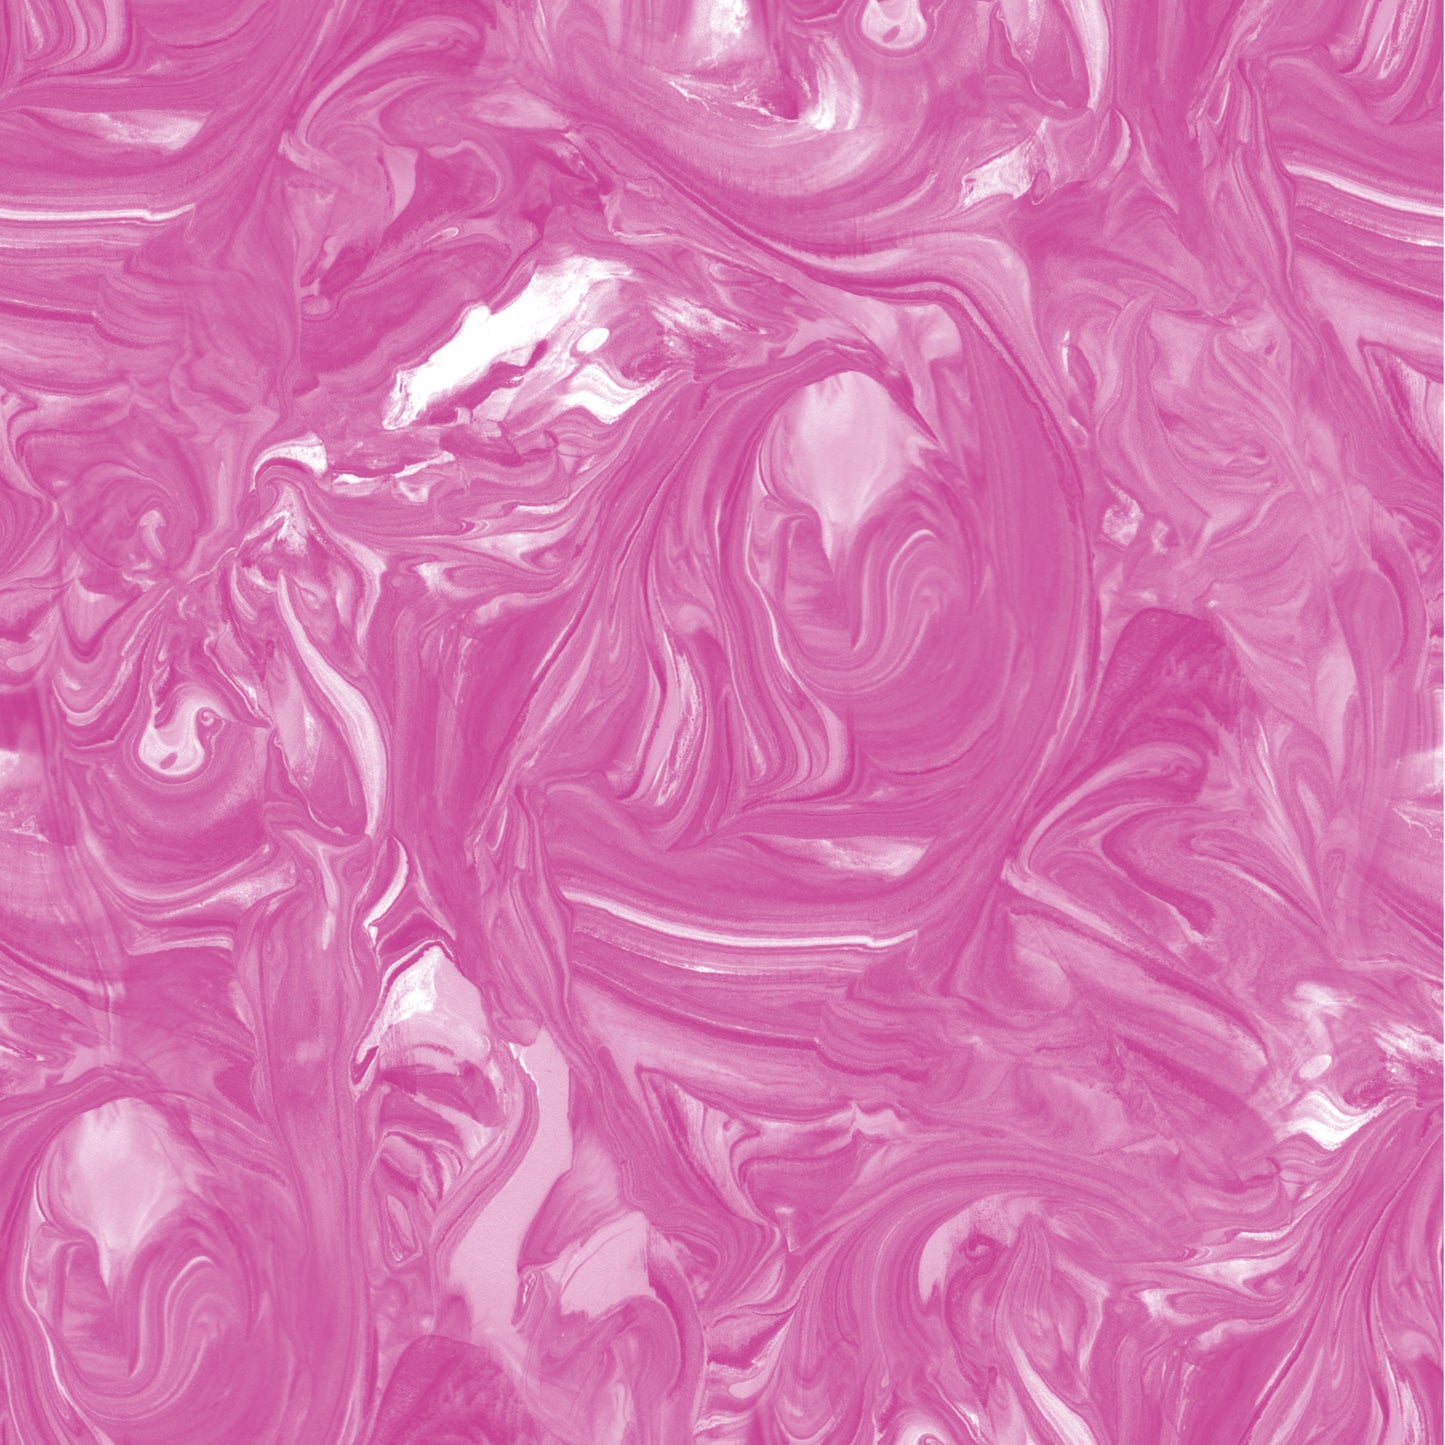 Hot Pink Marble custom Napkin in barbie pink full sublimation printed true colour